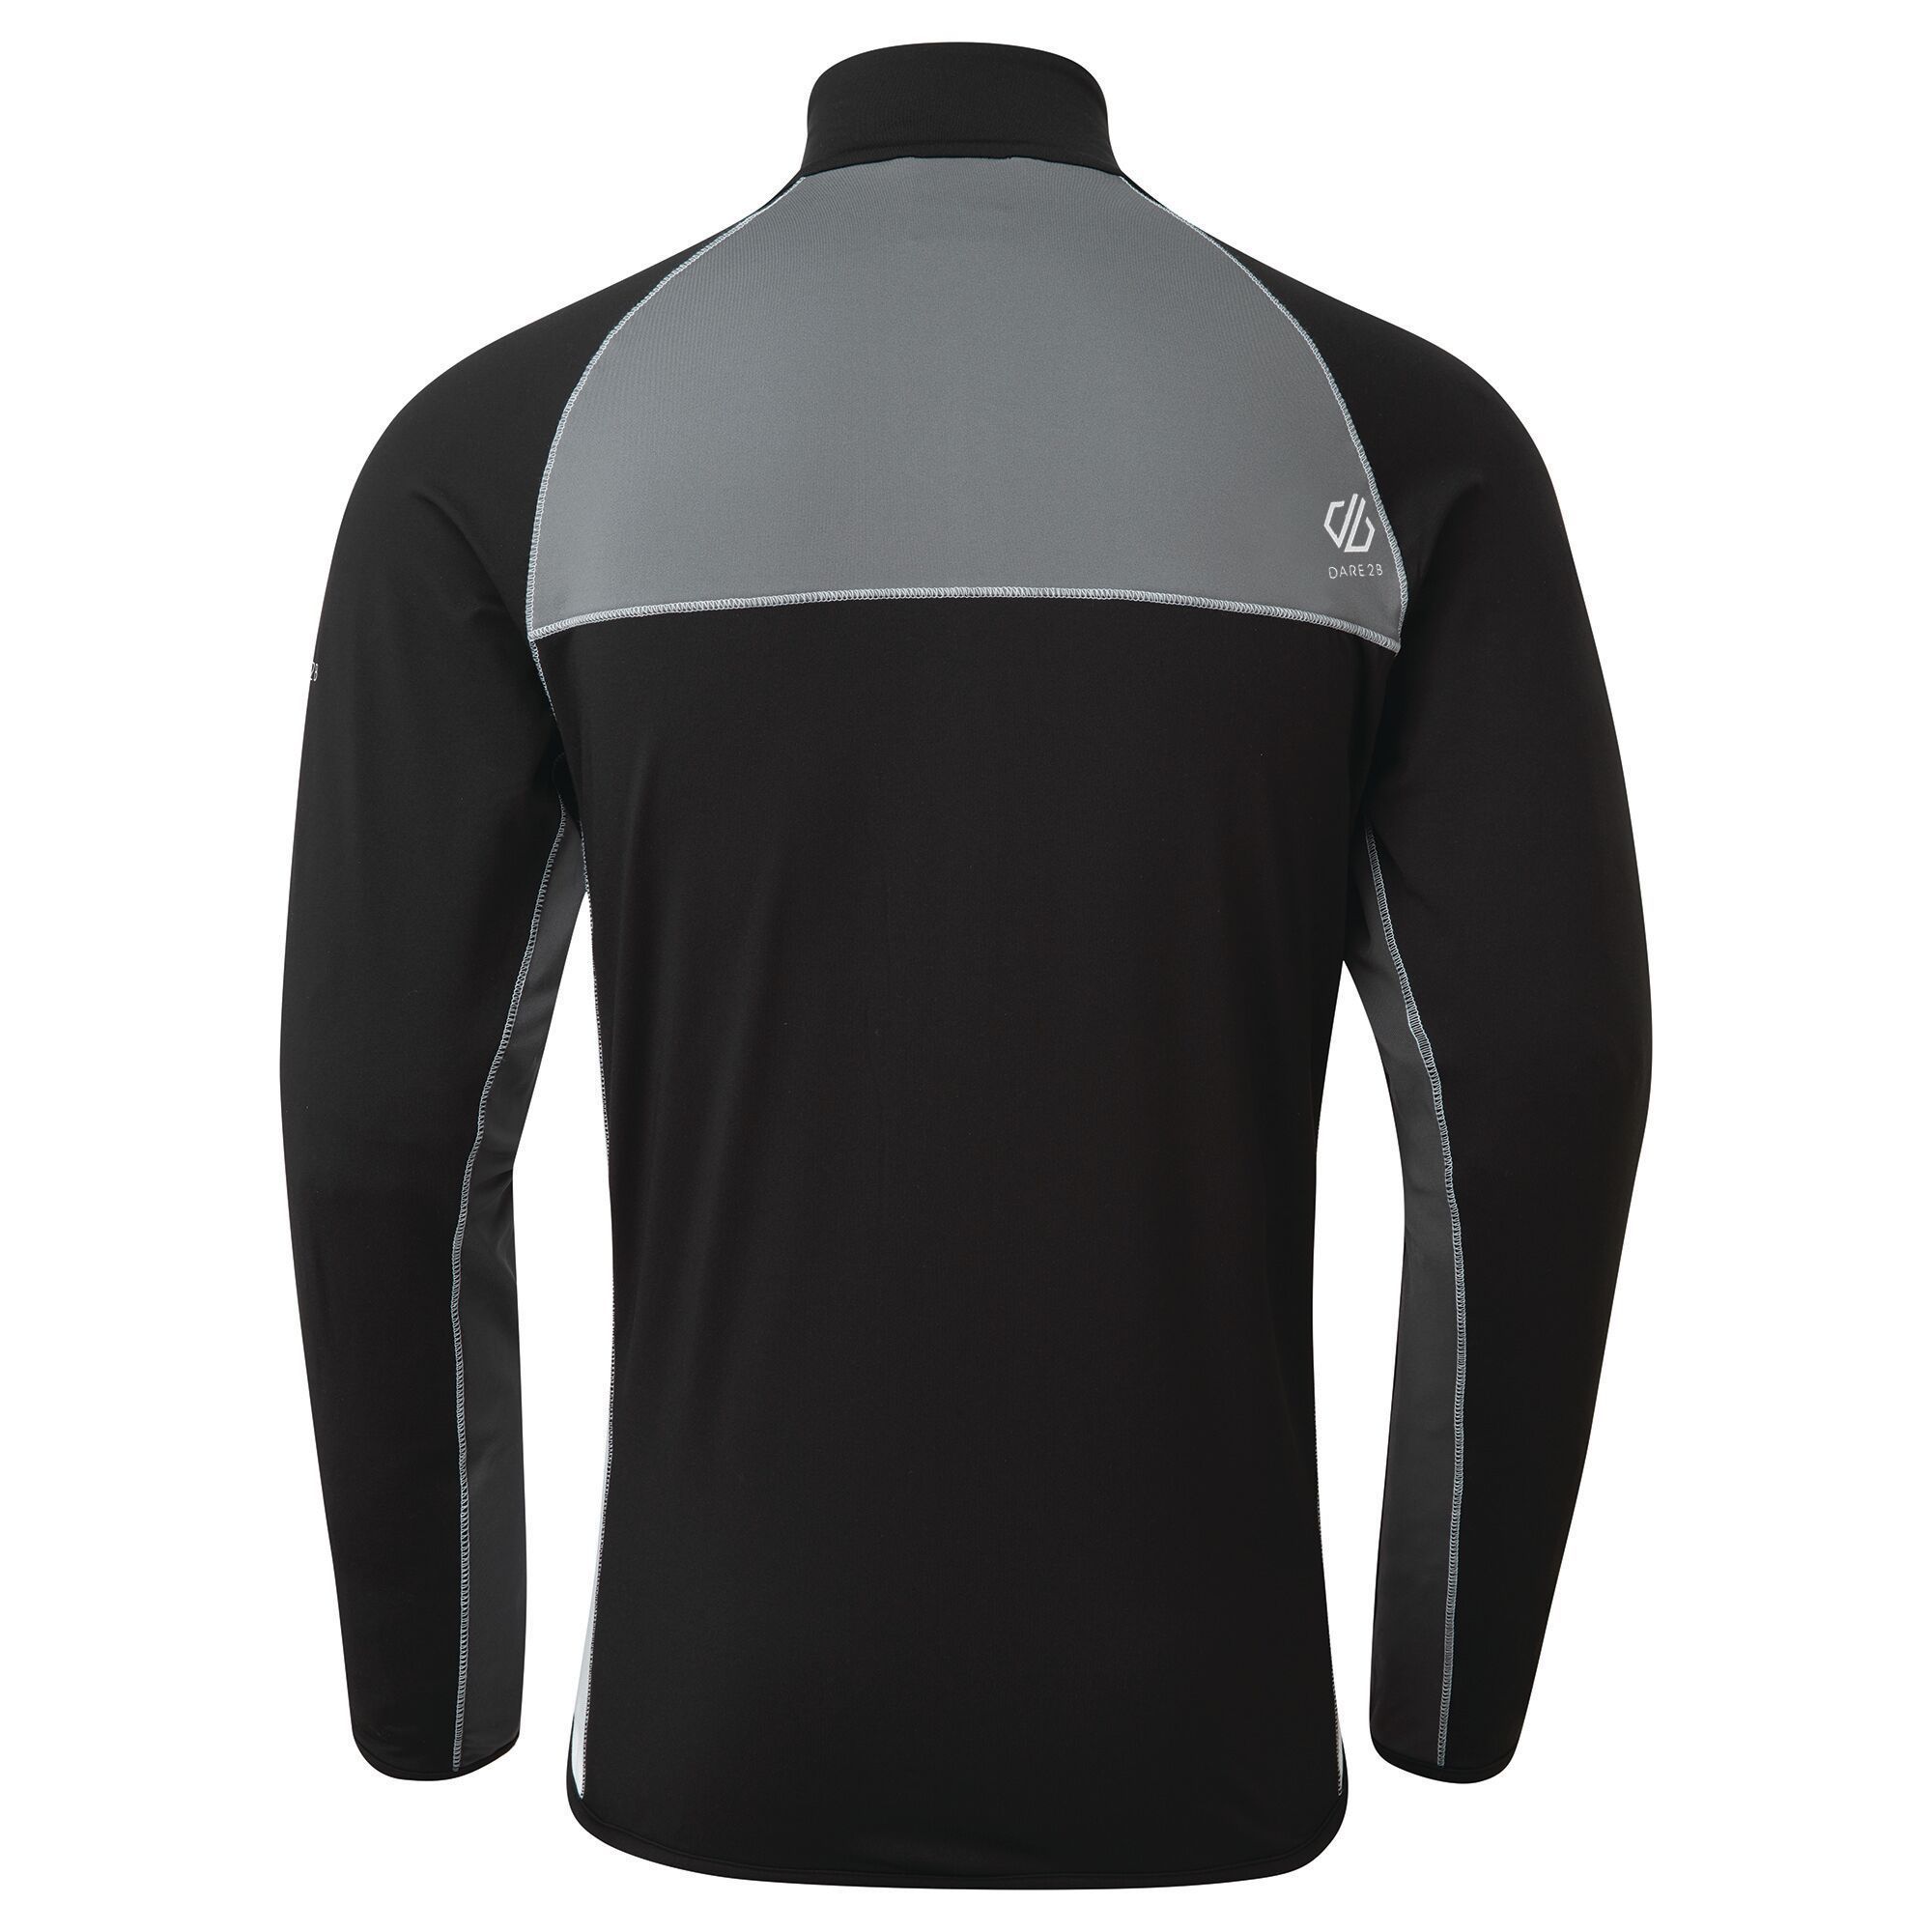 Material: 100% polyester. Lightweight Ilus Core warm waffle grid backed stretch fabric. Quick drying. Full length zip. Inner zip & chin guard. 2 x lower zip pockets. Stretch binding to cuffs and hem.